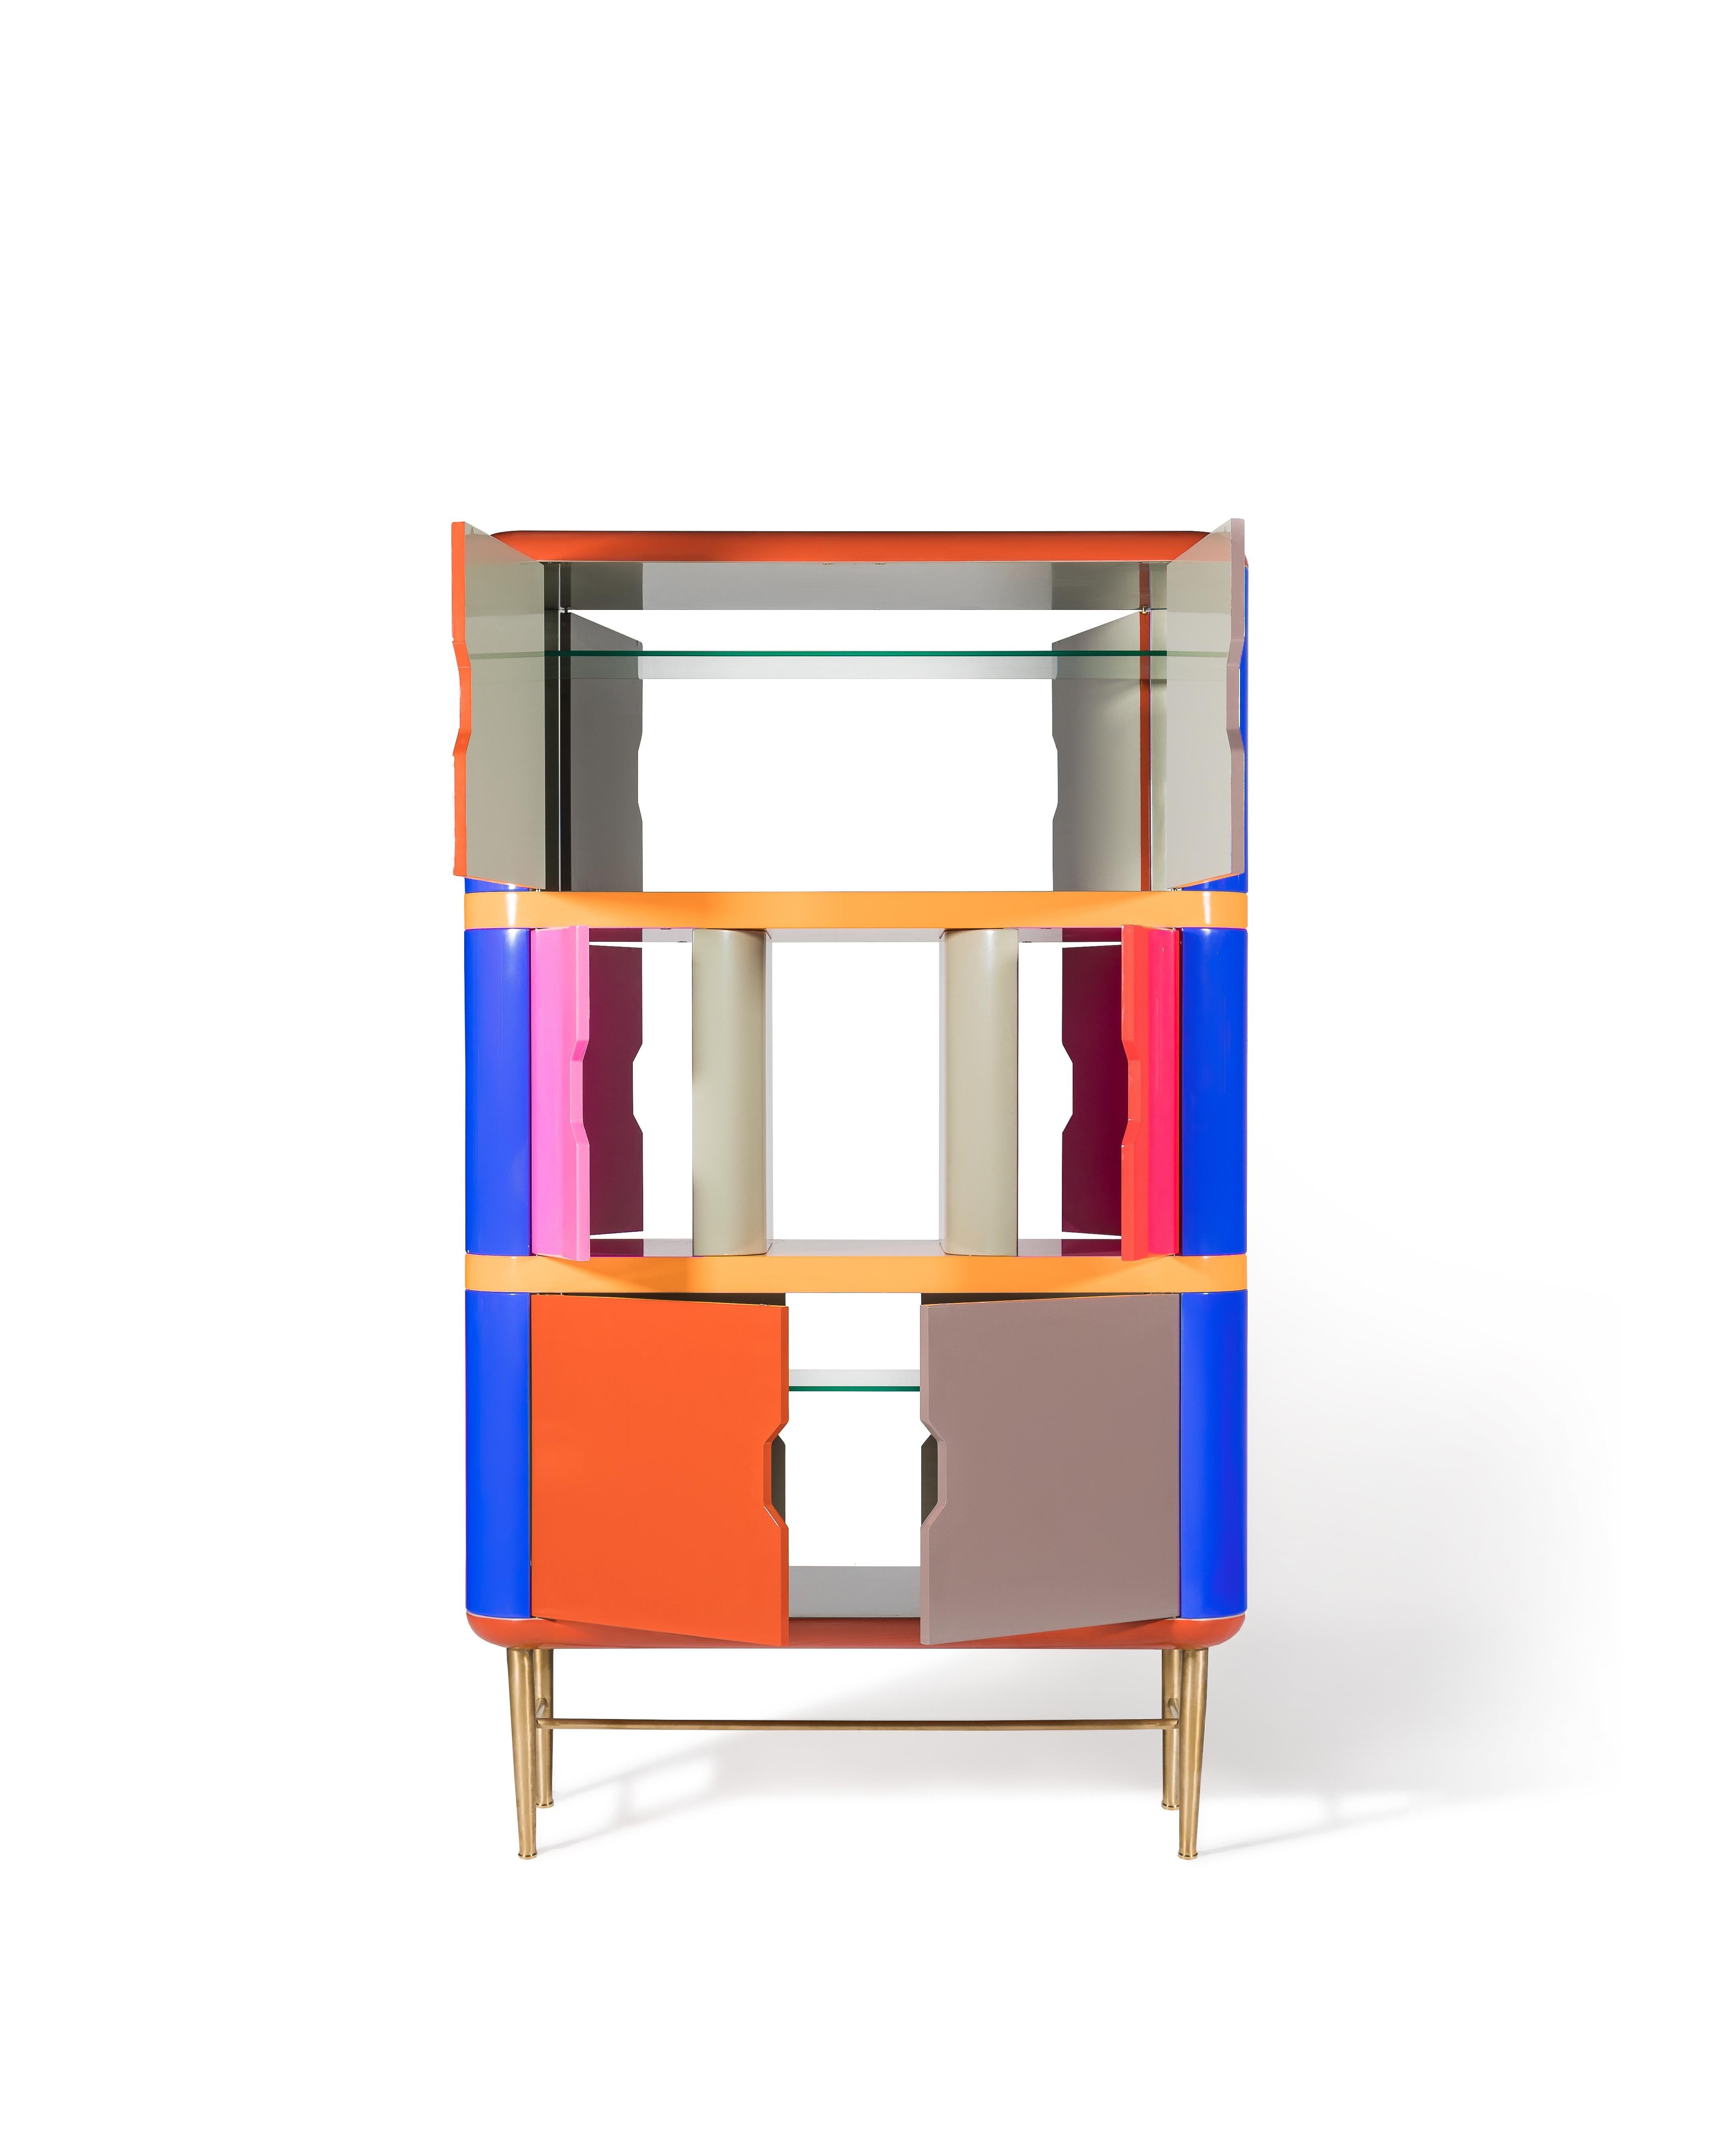 In the true Asian tradition, this family of lacquered furniture adds multiple colour to classic forms. The glass topped console works perfectly in an entrance or lobby, the
sideboard adds function and elegance to the living or dining room, and the